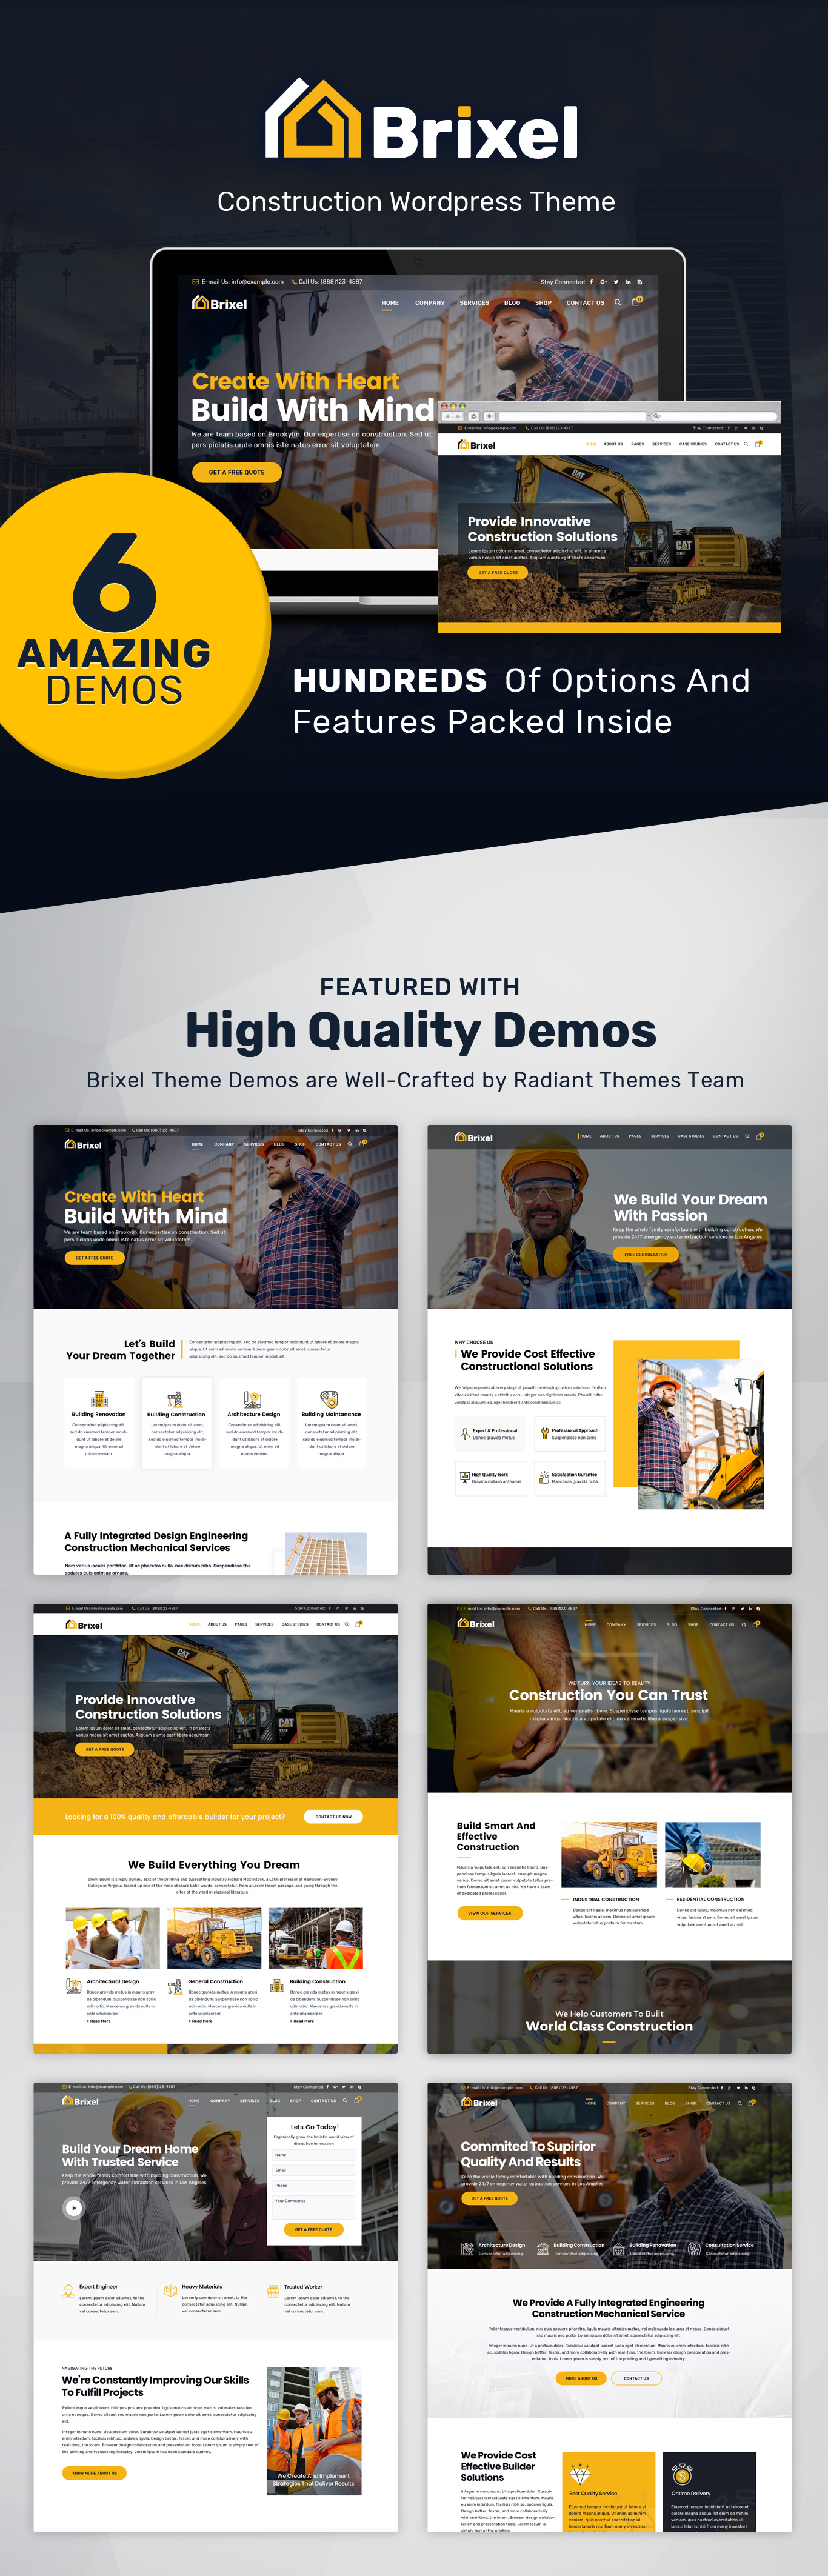 Construction Theme Home Page Designs